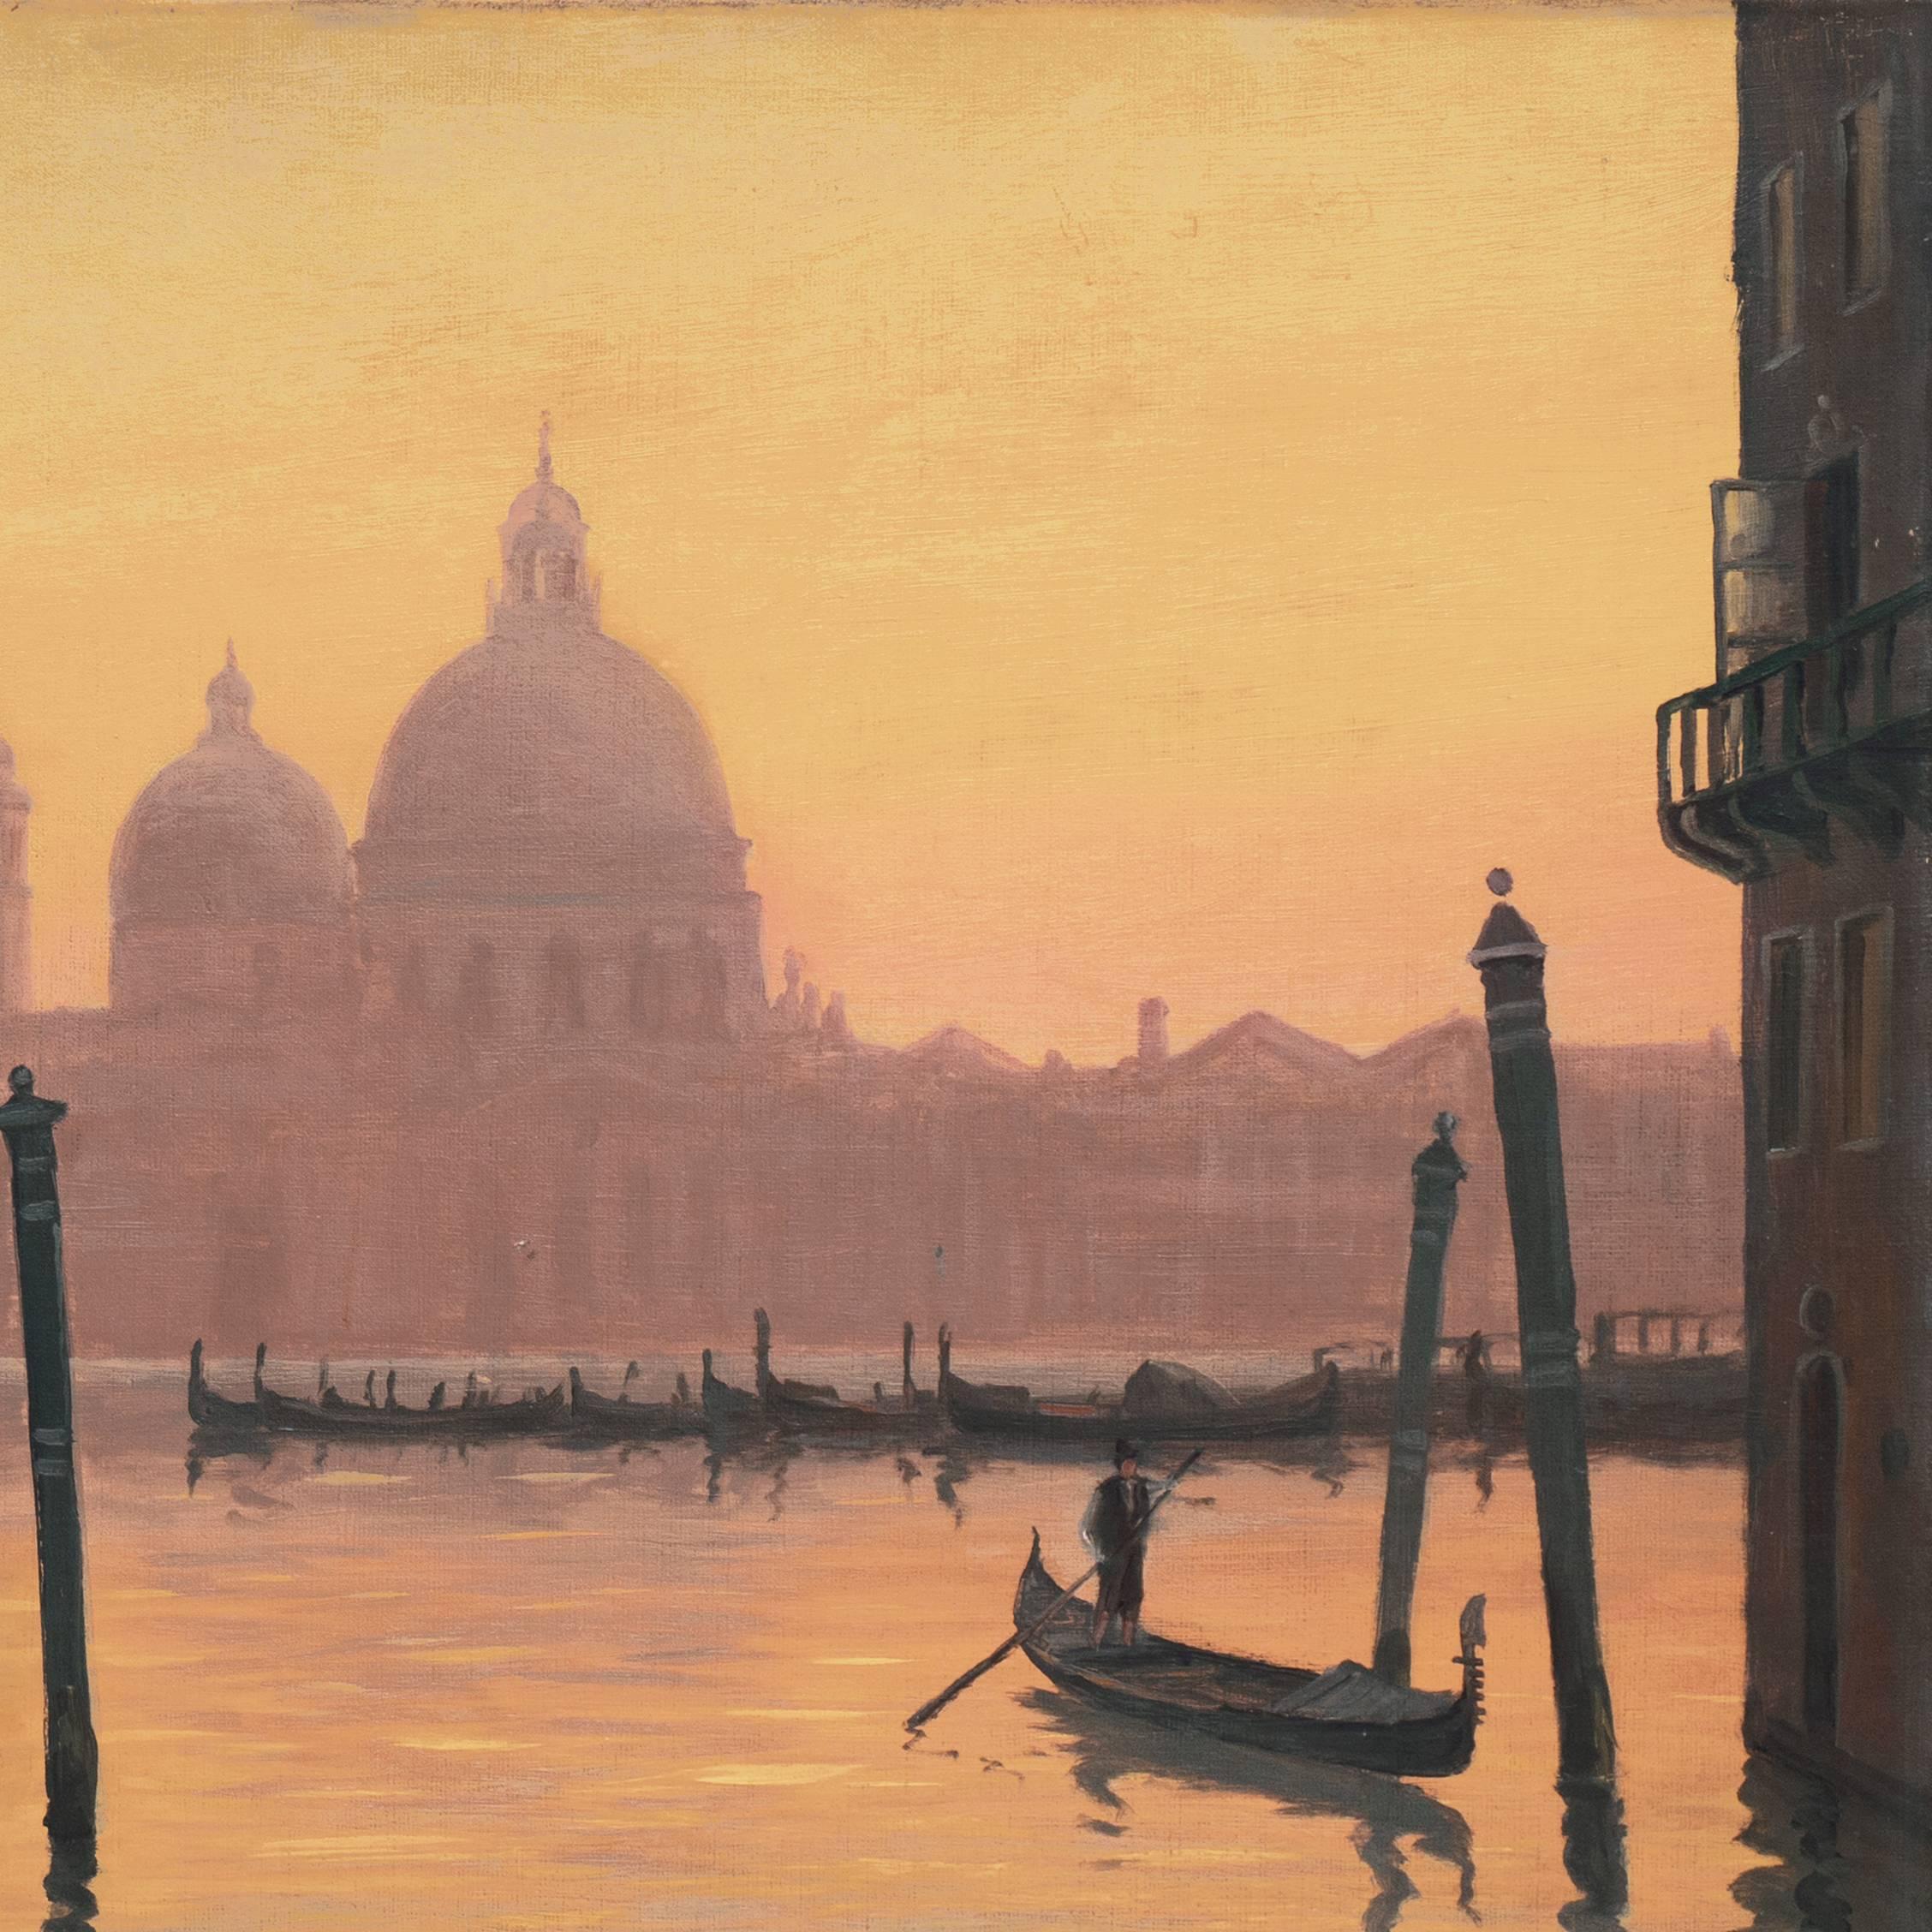 Signed lower right, "Alfred Olsen", dated 1906, titled "Venezia", and inscribed on a label verso "S Maria della Salute sil fra Piazetta".

An early twentieth-century Venetian vedute looking across the Grand Canal to